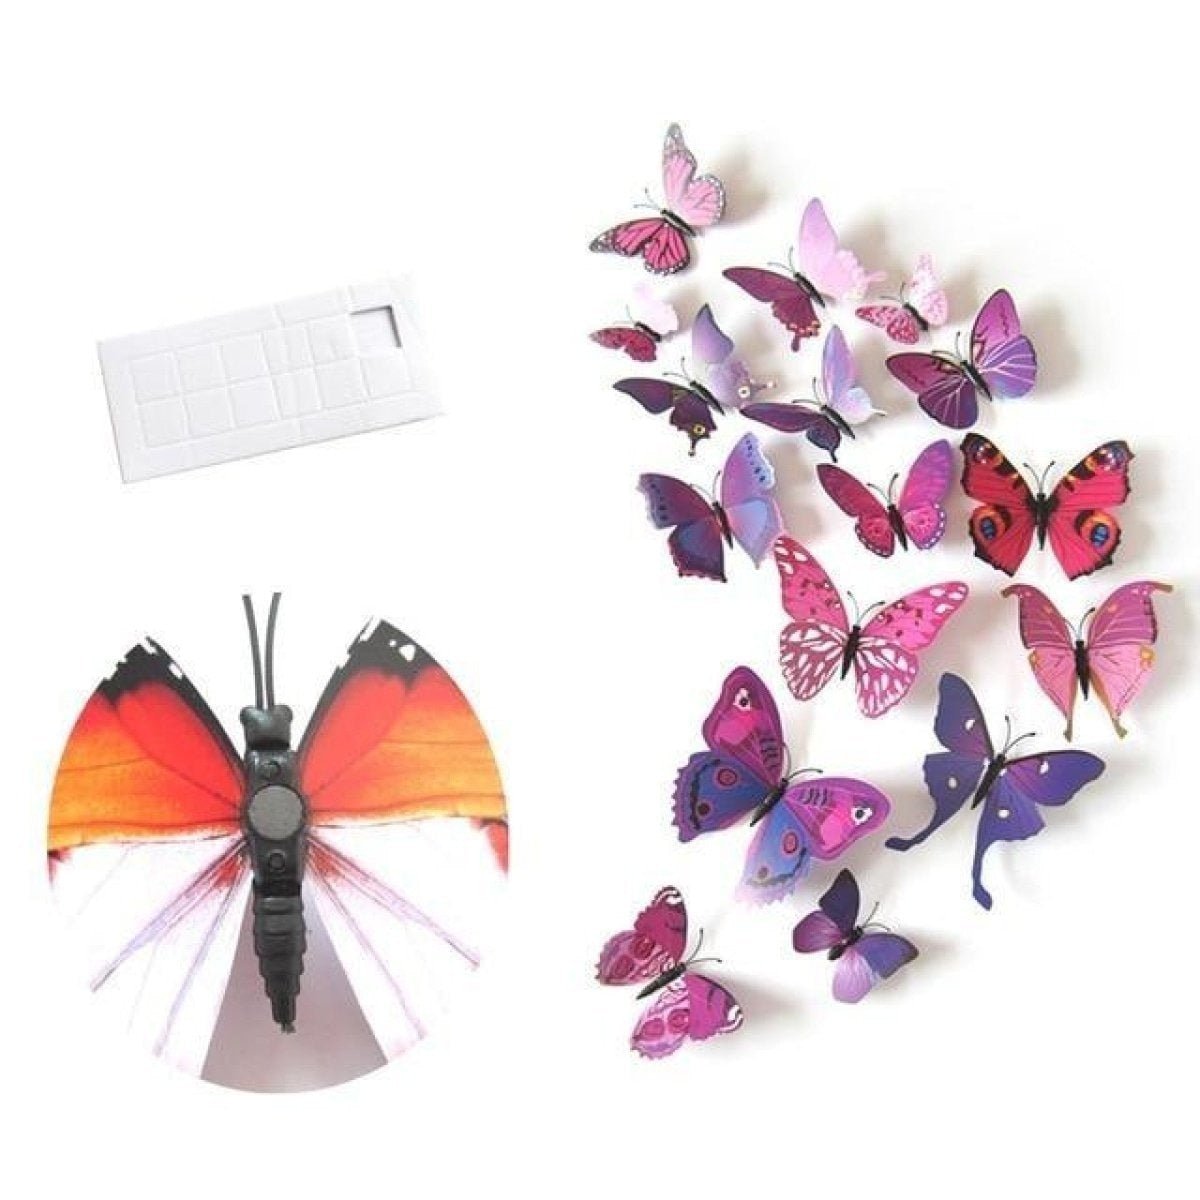 12pcs PVC 3D Butterfly Wall Fridge Decorations Butterflies Art Magnet Pin Toy Plastic Shapes - Magnet 1 - - Asia Sell